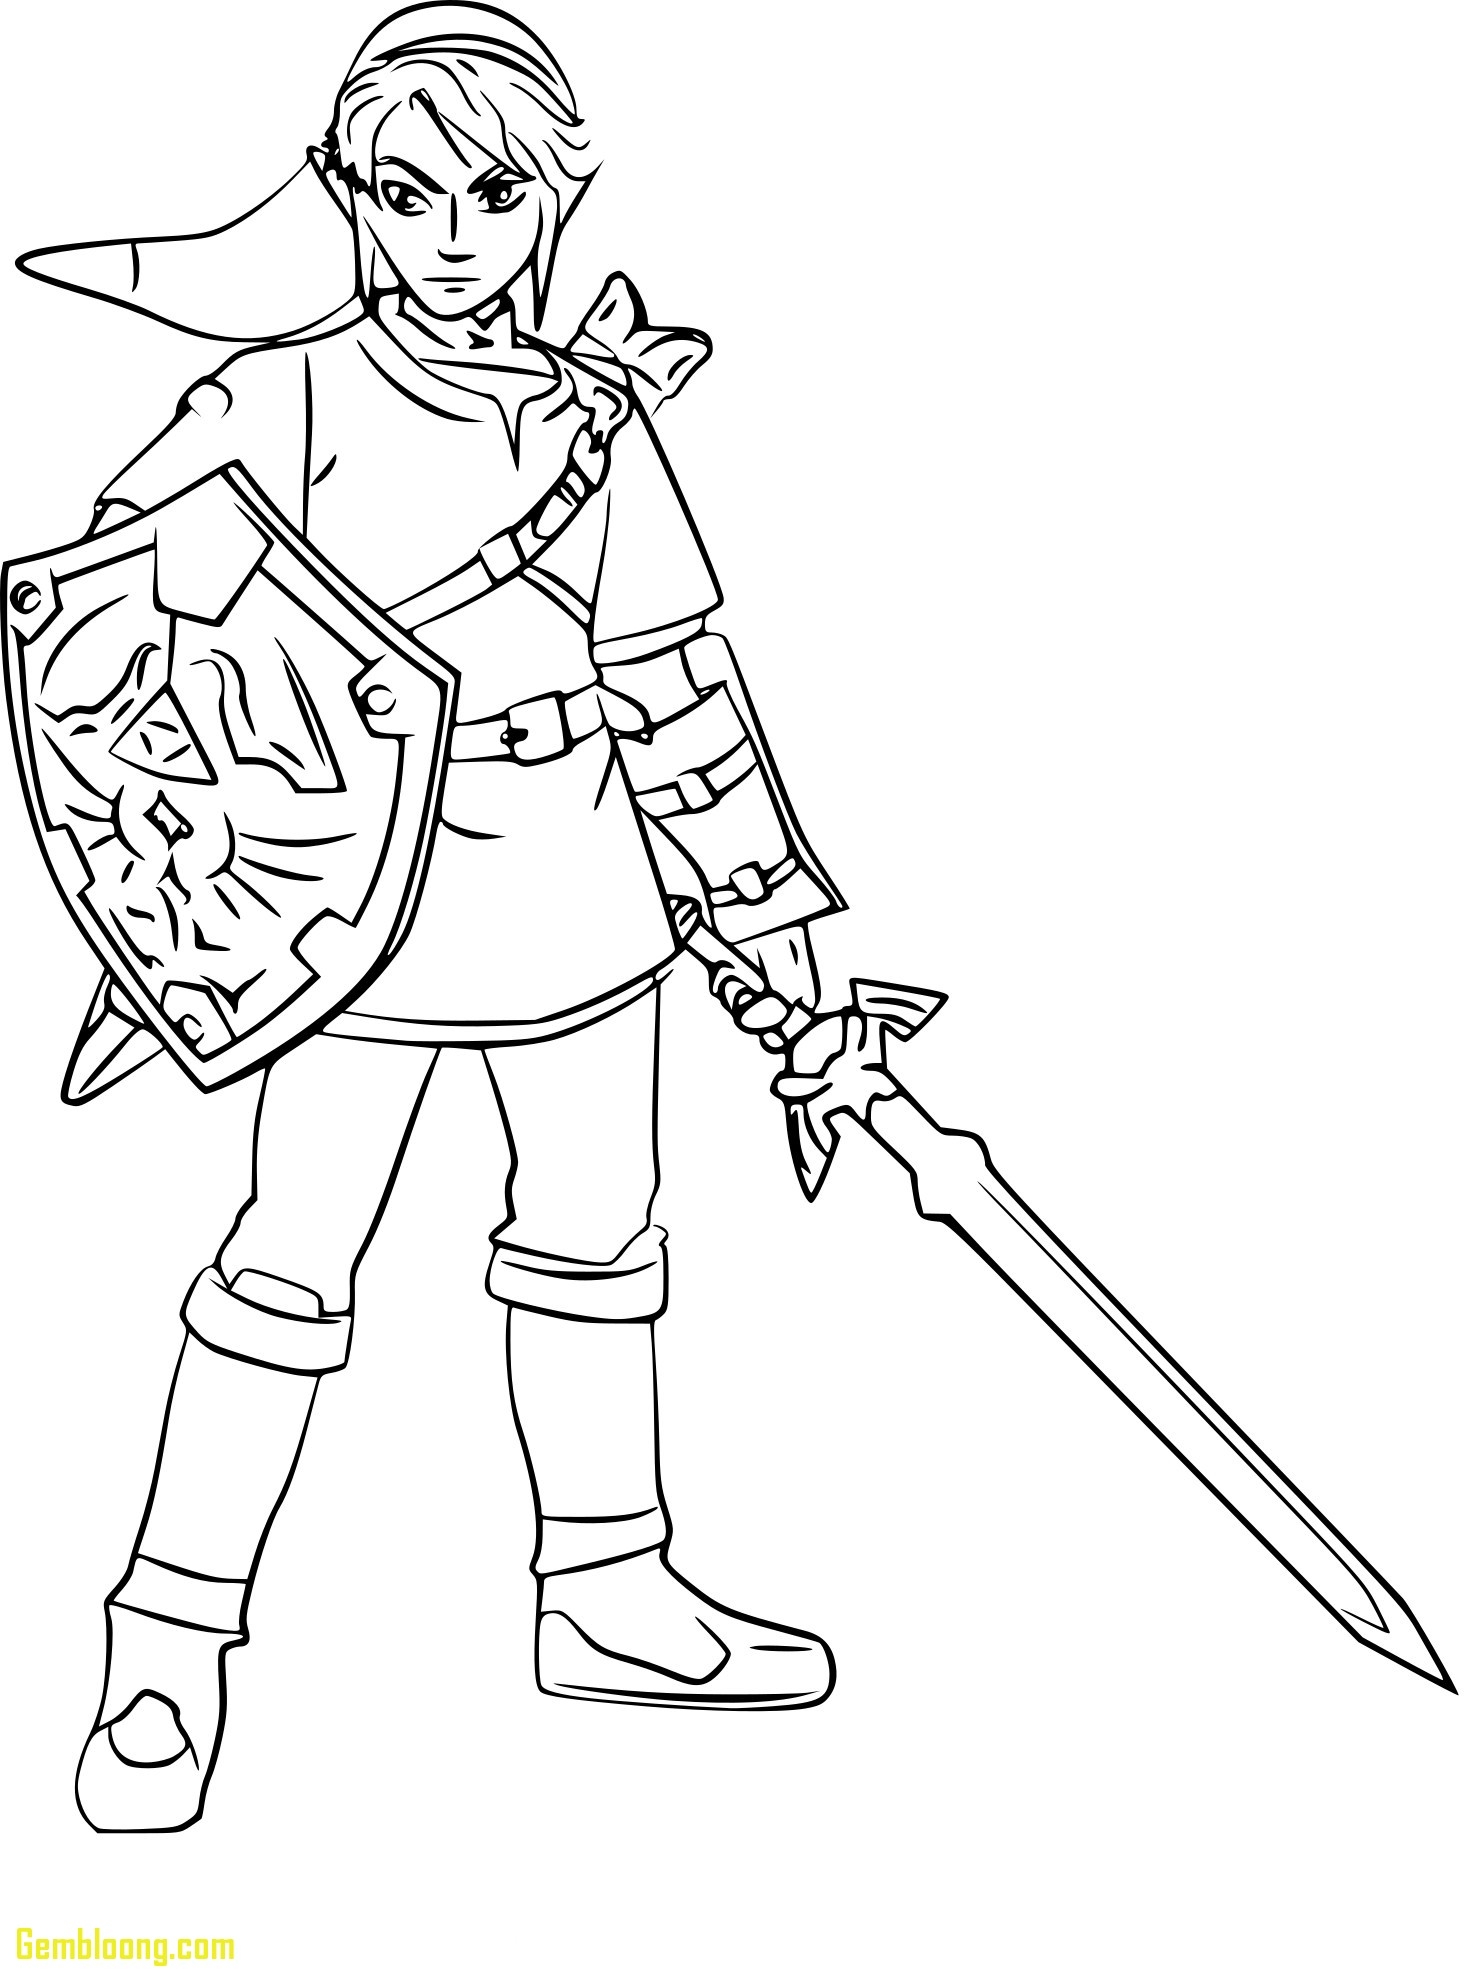 link coloring pages free